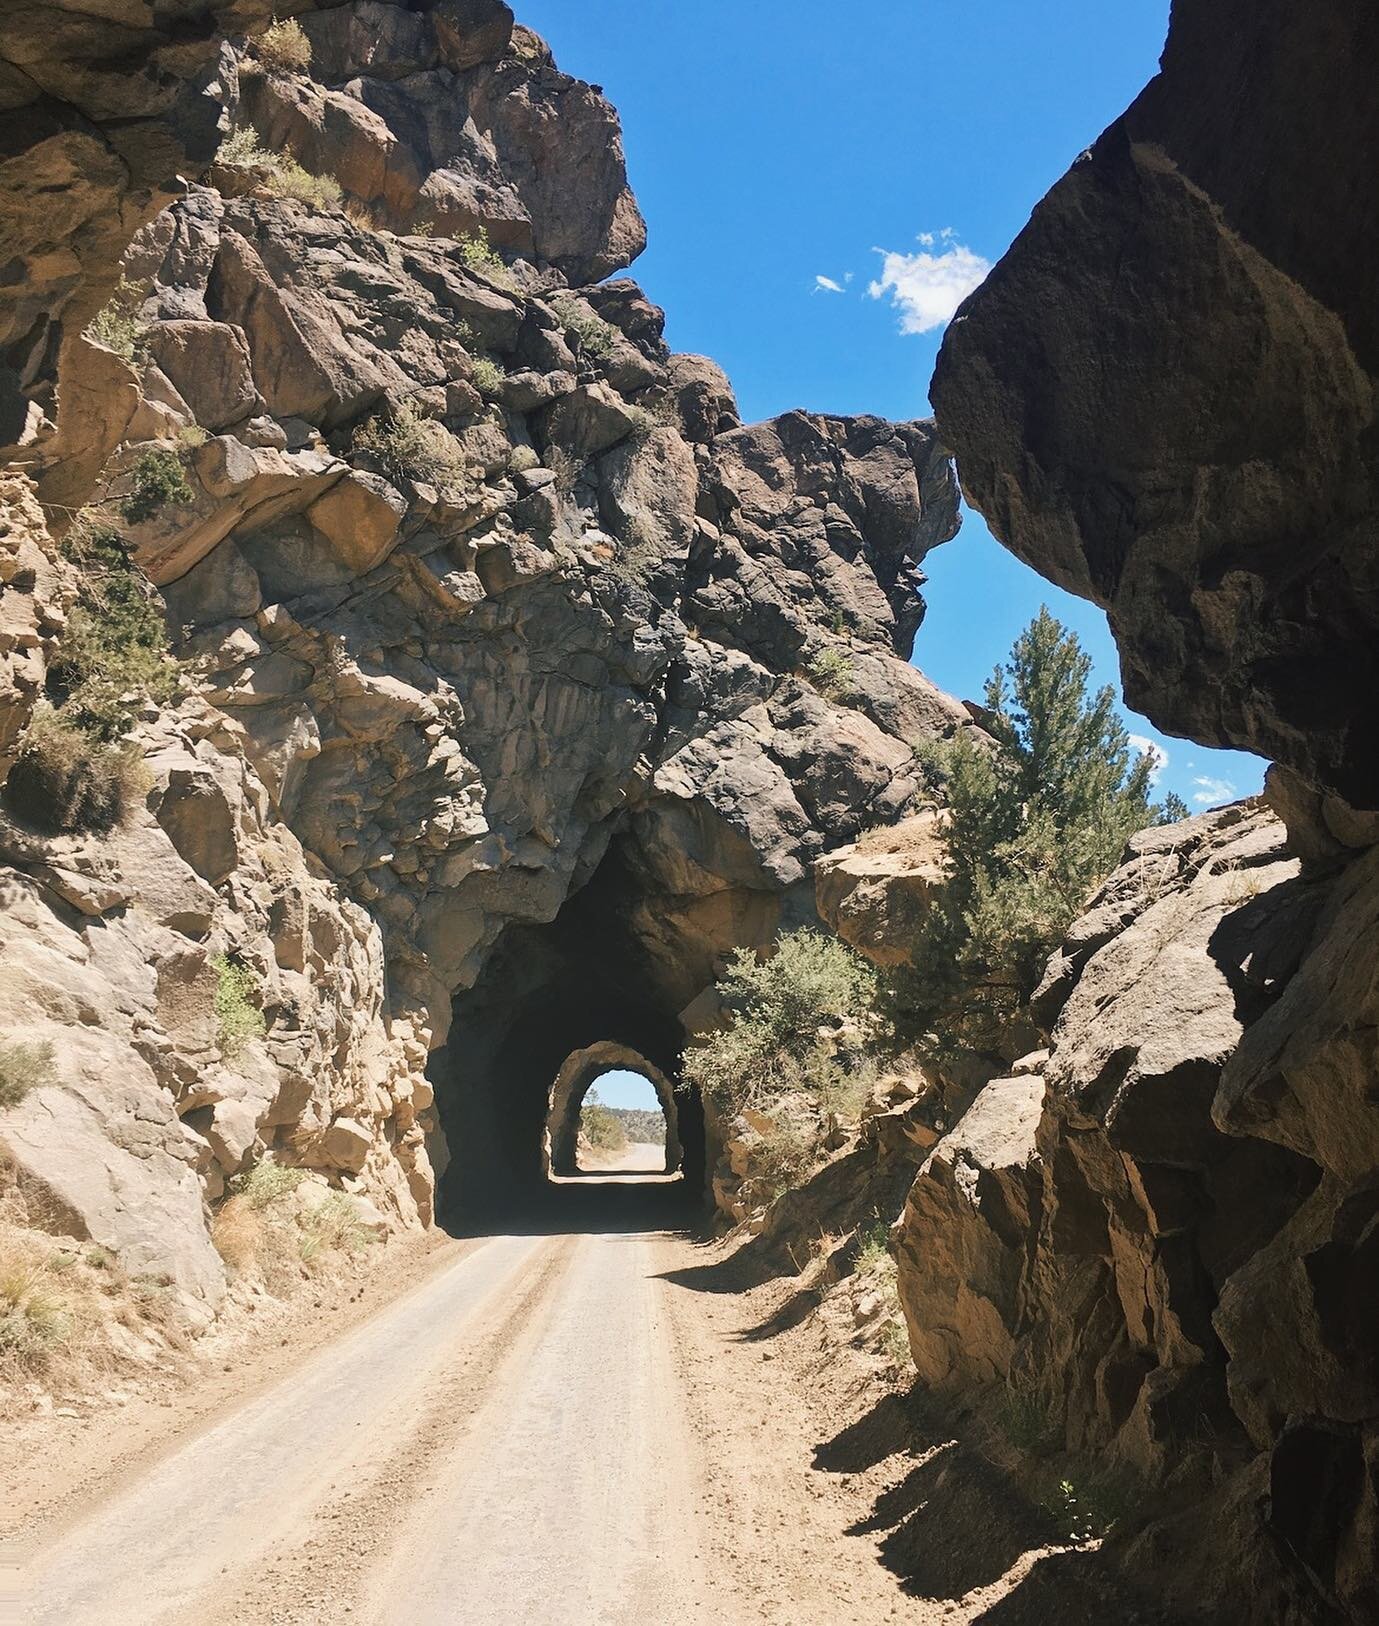 Have you been by this little gem here in BV? The Midland Railroad Tunnels are a series of tunnels used by the Colorado Midland railway from the 1880s until its closure in the early part of the twentieth century. The tunnels ran between Colorado Sprin